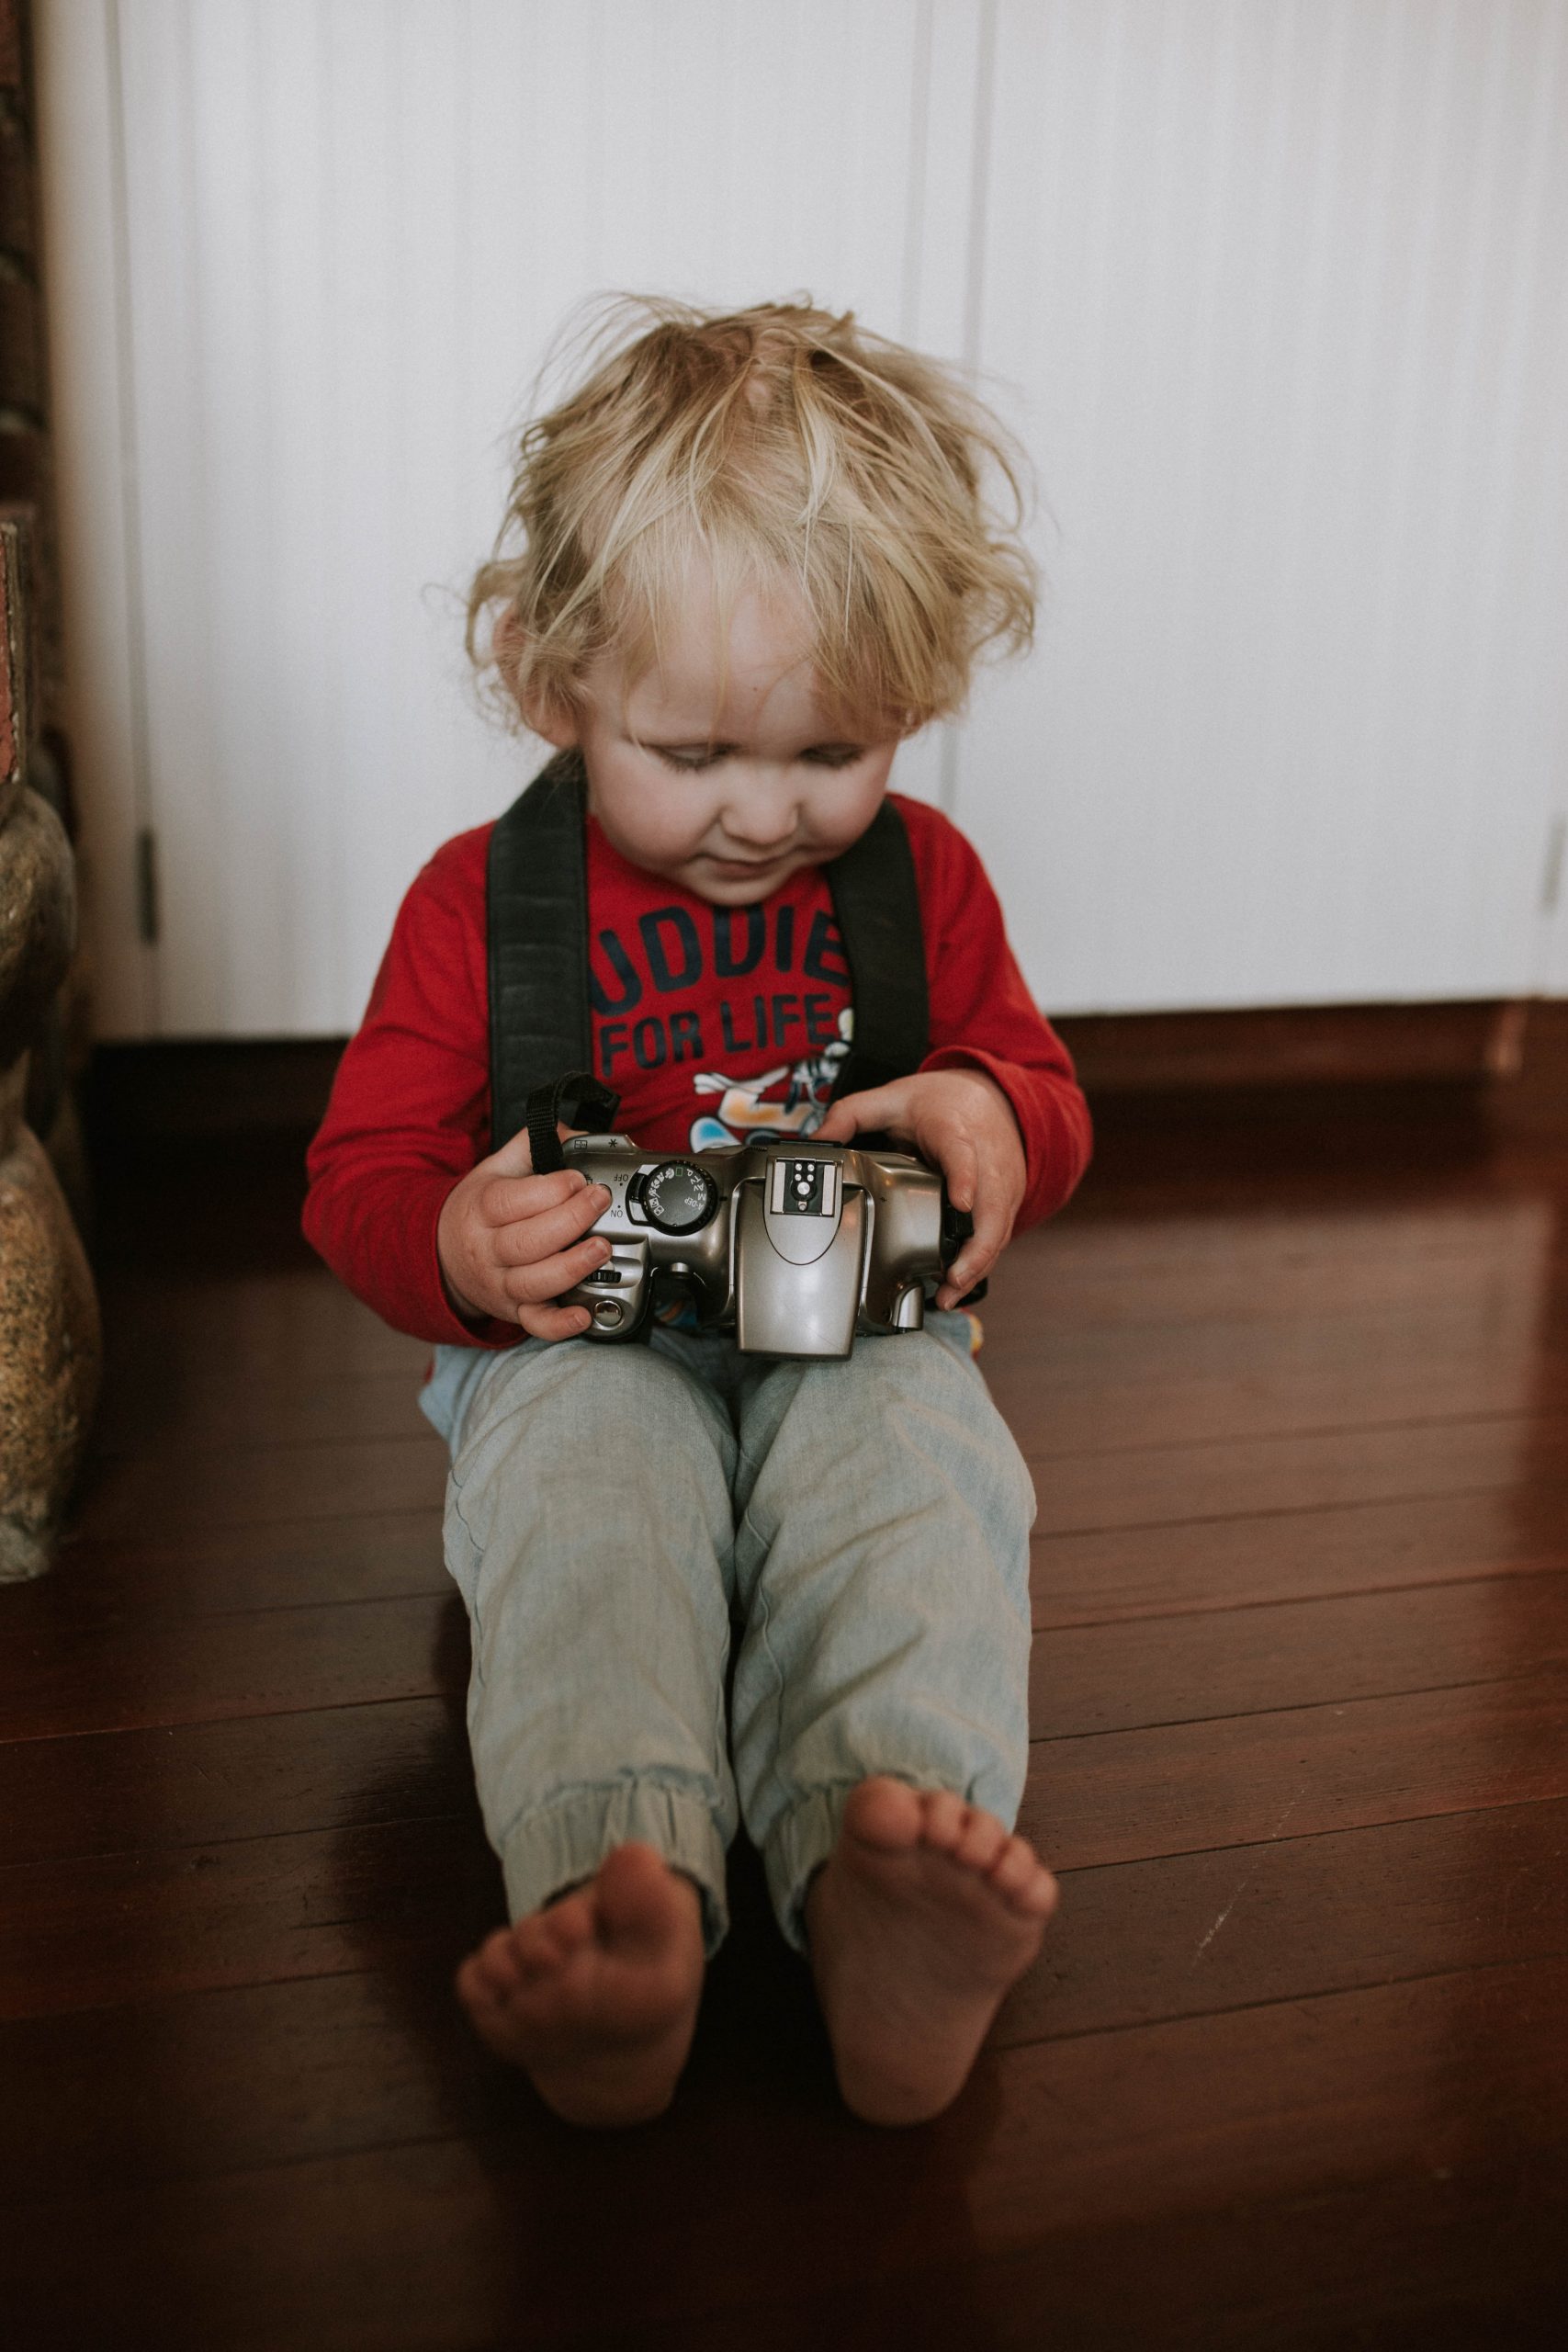 My son loves my old cannon camera to play photographer with